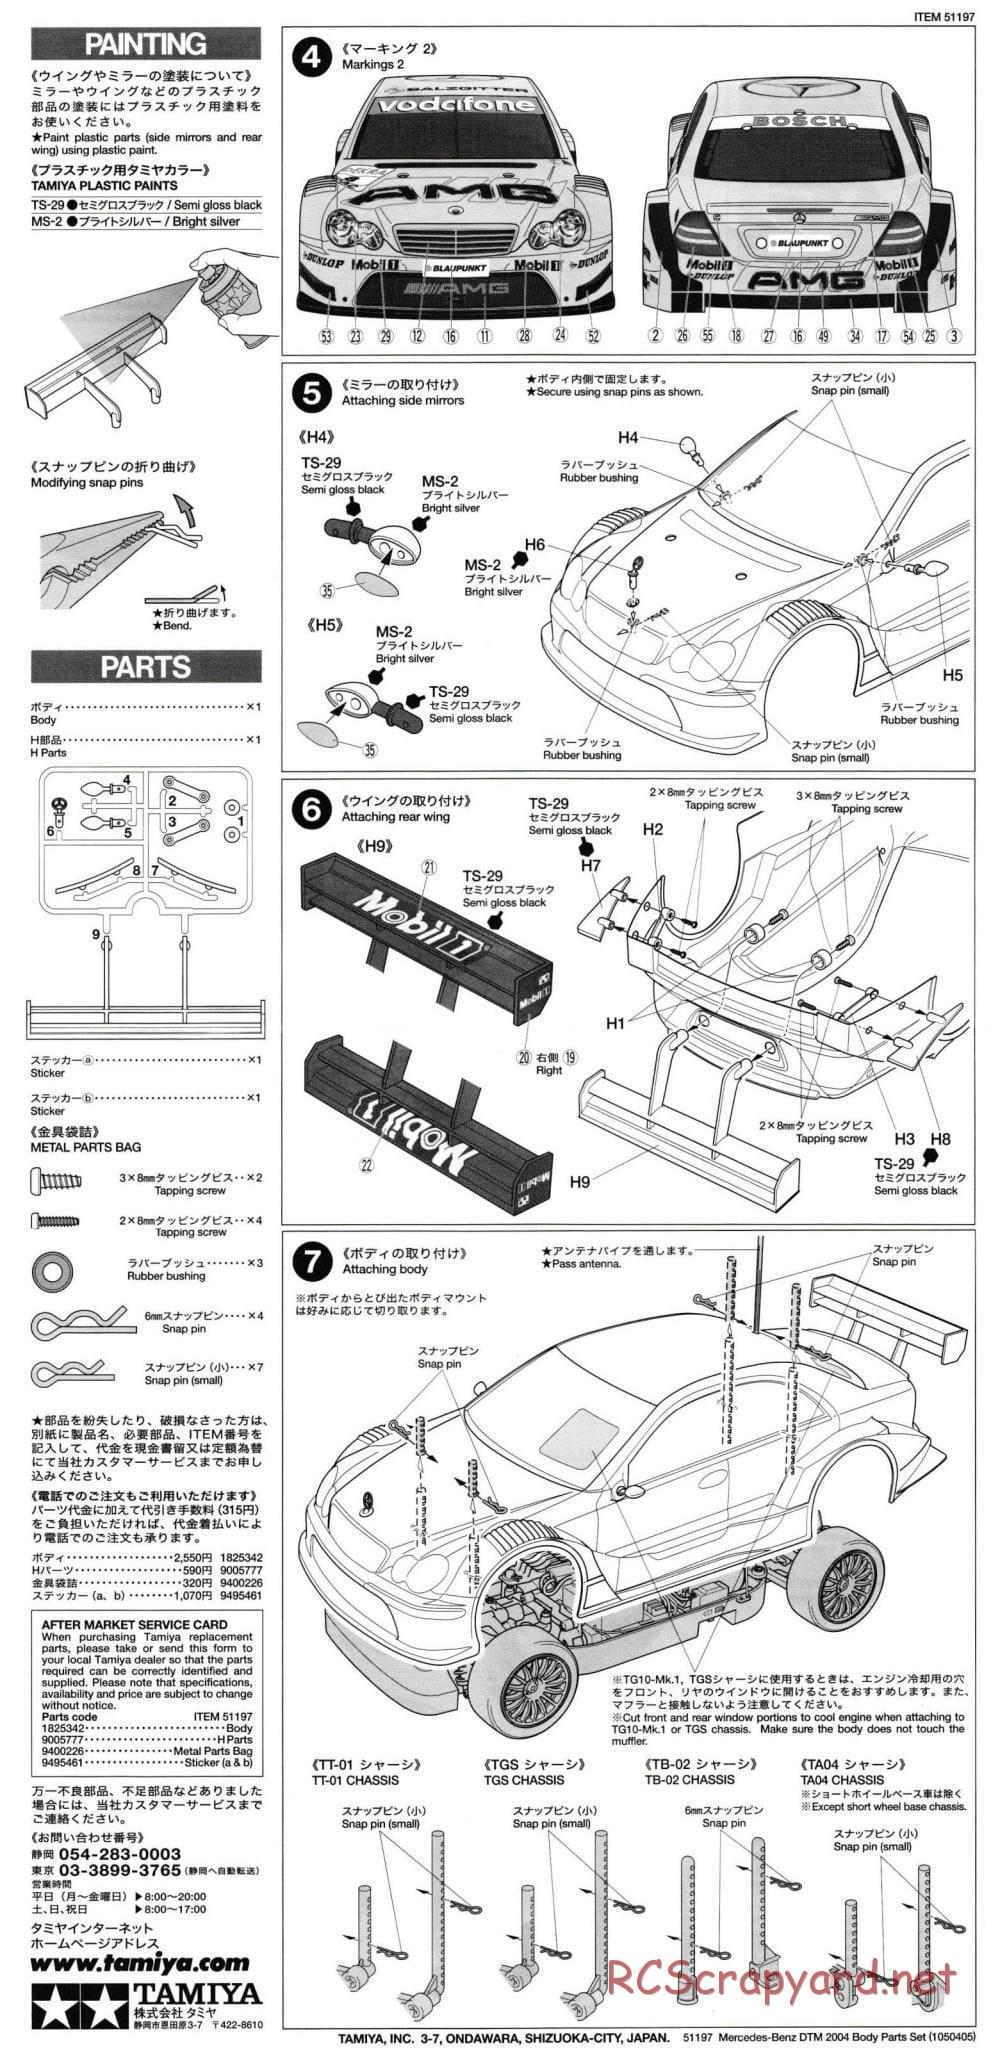 Tamiya - Mercedes Benz C-Class DTM 2004 - TT-01 Chassis - Body Manual - Page 2